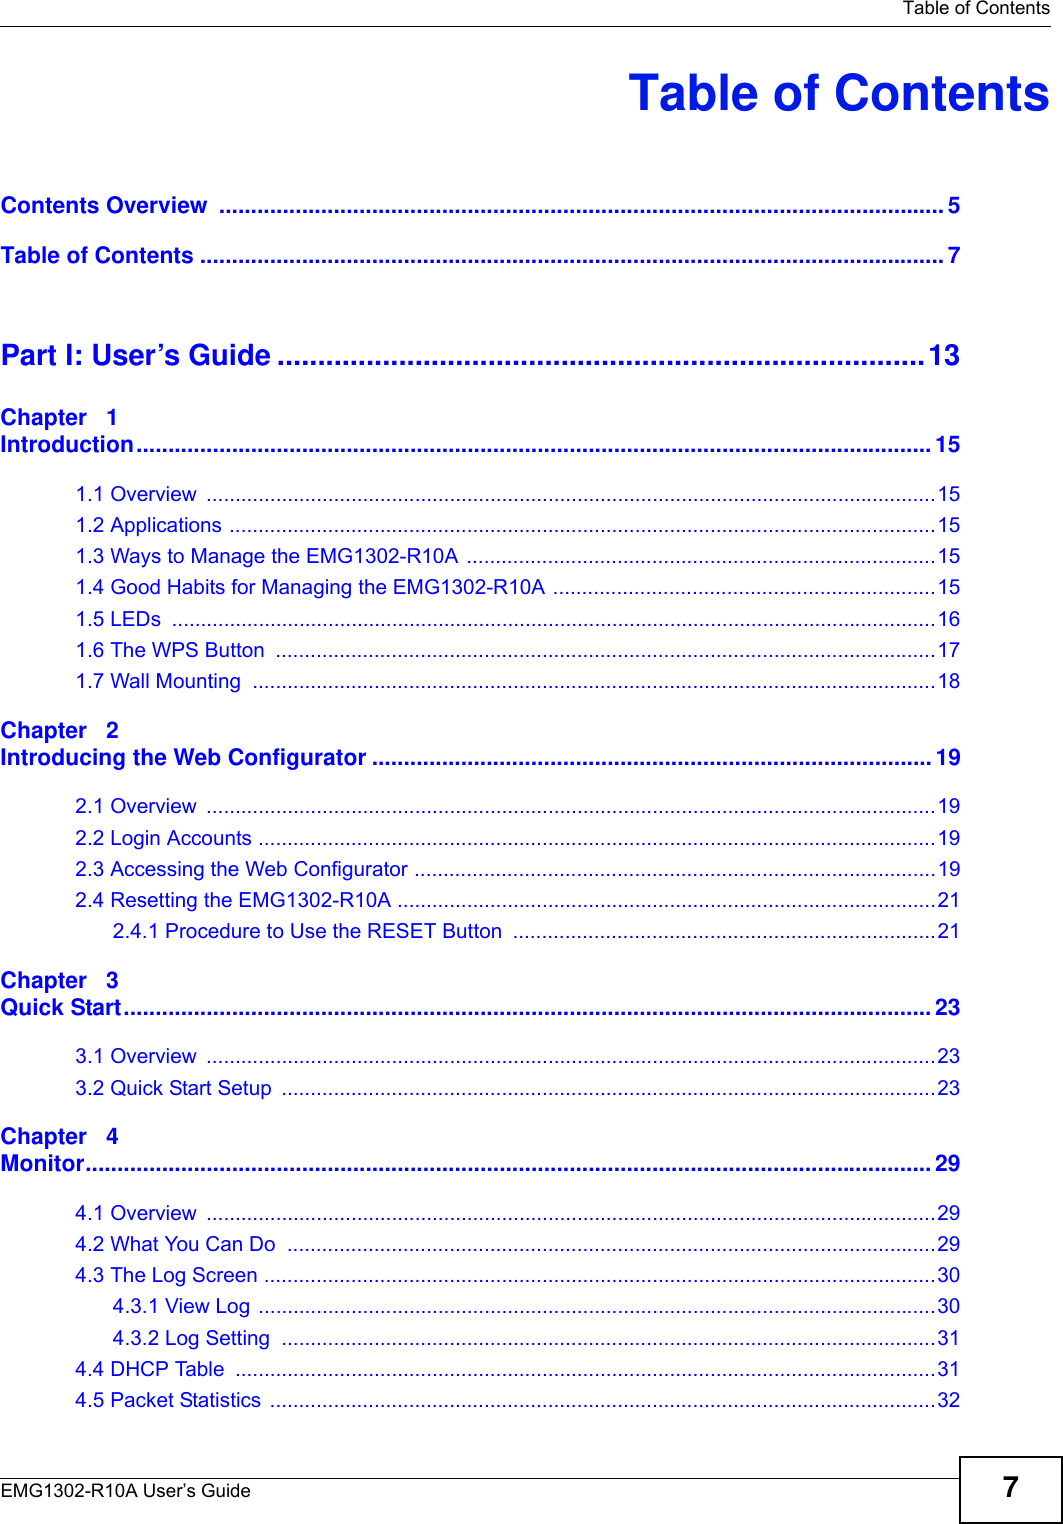   Table of ContentsEMG1302-R10A User’s Guide 7Table of ContentsContents Overview  .................................................................................................................. 5Table of Contents ..................................................................................................................... 7Part I: User’s Guide ................................................................................13Chapter   1Introduction............................................................................................................................. 151.1 Overview  ..............................................................................................................................151.2 Applications ..........................................................................................................................151.3 Ways to Manage the EMG1302-R10A .................................................................................151.4 Good Habits for Managing the EMG1302-R10A ..................................................................151.5 LEDs  ....................................................................................................................................161.6 The WPS Button  ..................................................................................................................171.7 Wall Mounting  ......................................................................................................................18Chapter   2Introducing the Web Configurator ........................................................................................ 192.1 Overview  ..............................................................................................................................192.2 Login Accounts .....................................................................................................................192.3 Accessing the Web Configurator ..........................................................................................192.4 Resetting the EMG1302-R10A .............................................................................................212.4.1 Procedure to Use the RESET Button  .........................................................................21Chapter   3Quick Start............................................................................................................................... 233.1 Overview  ..............................................................................................................................233.2 Quick Start Setup  .................................................................................................................23Chapter   4Monitor..................................................................................................................................... 294.1 Overview  ..............................................................................................................................294.2 What You Can Do  ................................................................................................................294.3 The Log Screen ....................................................................................................................304.3.1 View Log .....................................................................................................................304.3.2 Log Setting  .................................................................................................................314.4 DHCP Table  .........................................................................................................................314.5 Packet Statistics  ...................................................................................................................32